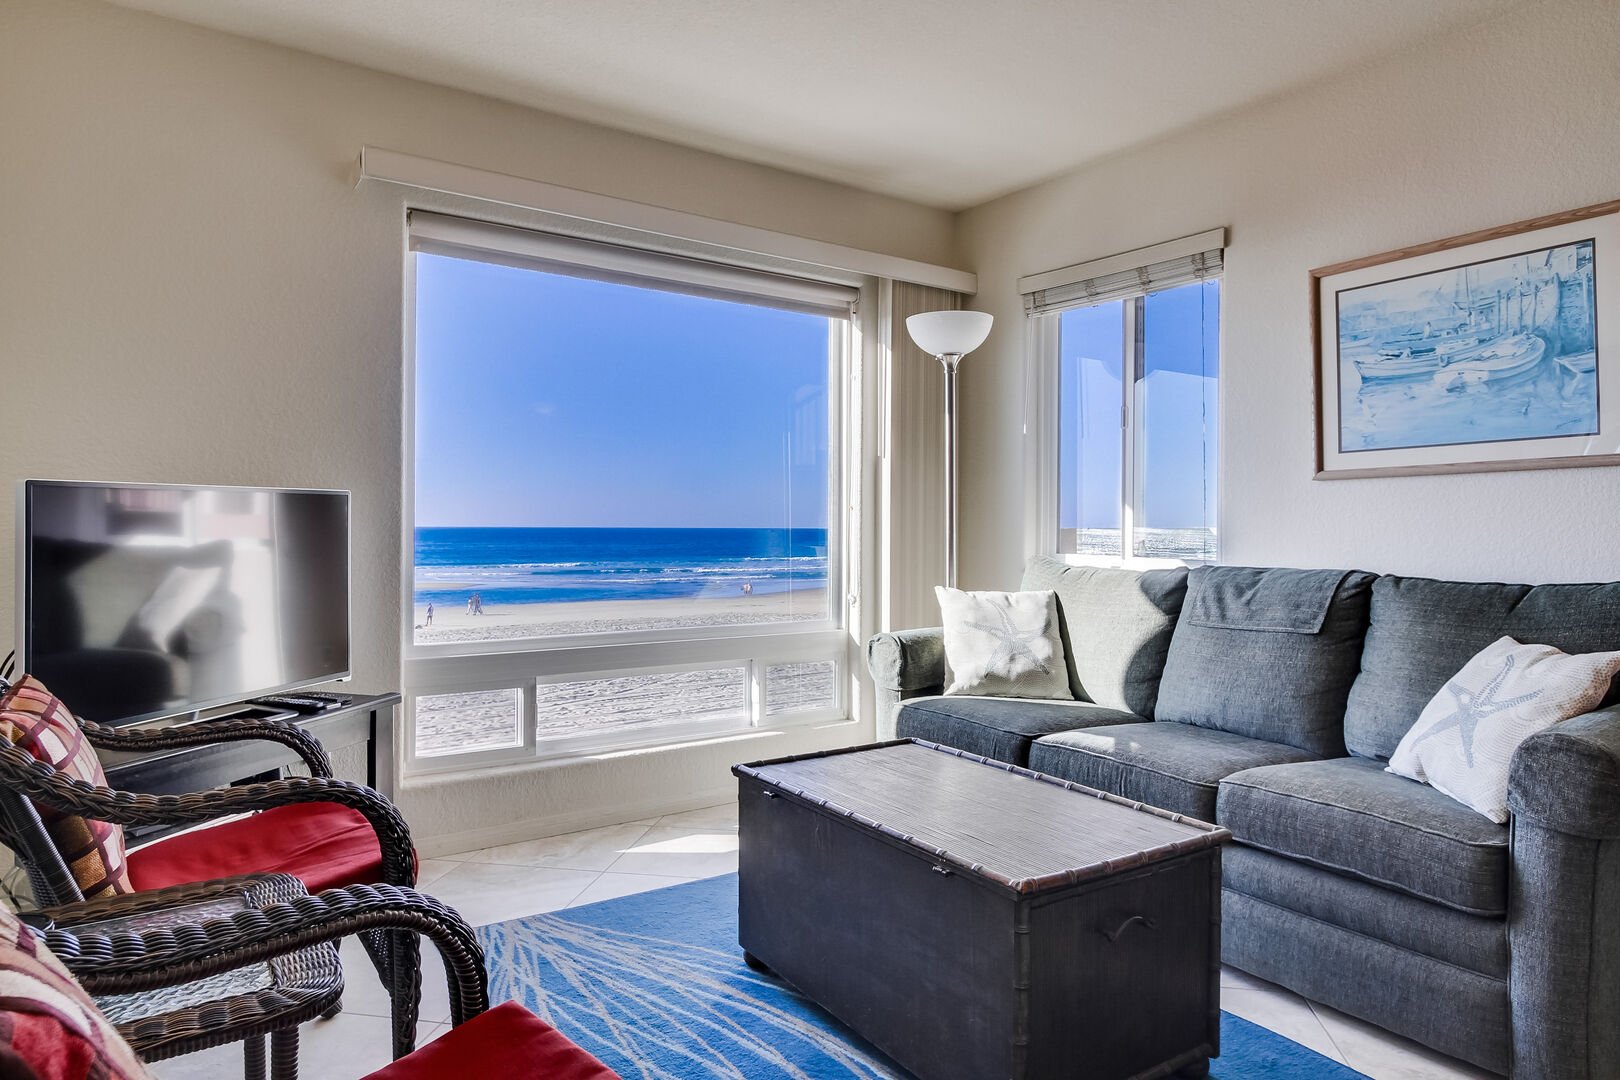 Living room with queen sofa bed, TV, lamp, lots of light, and incredible views of Pacific Beach and boardwalk